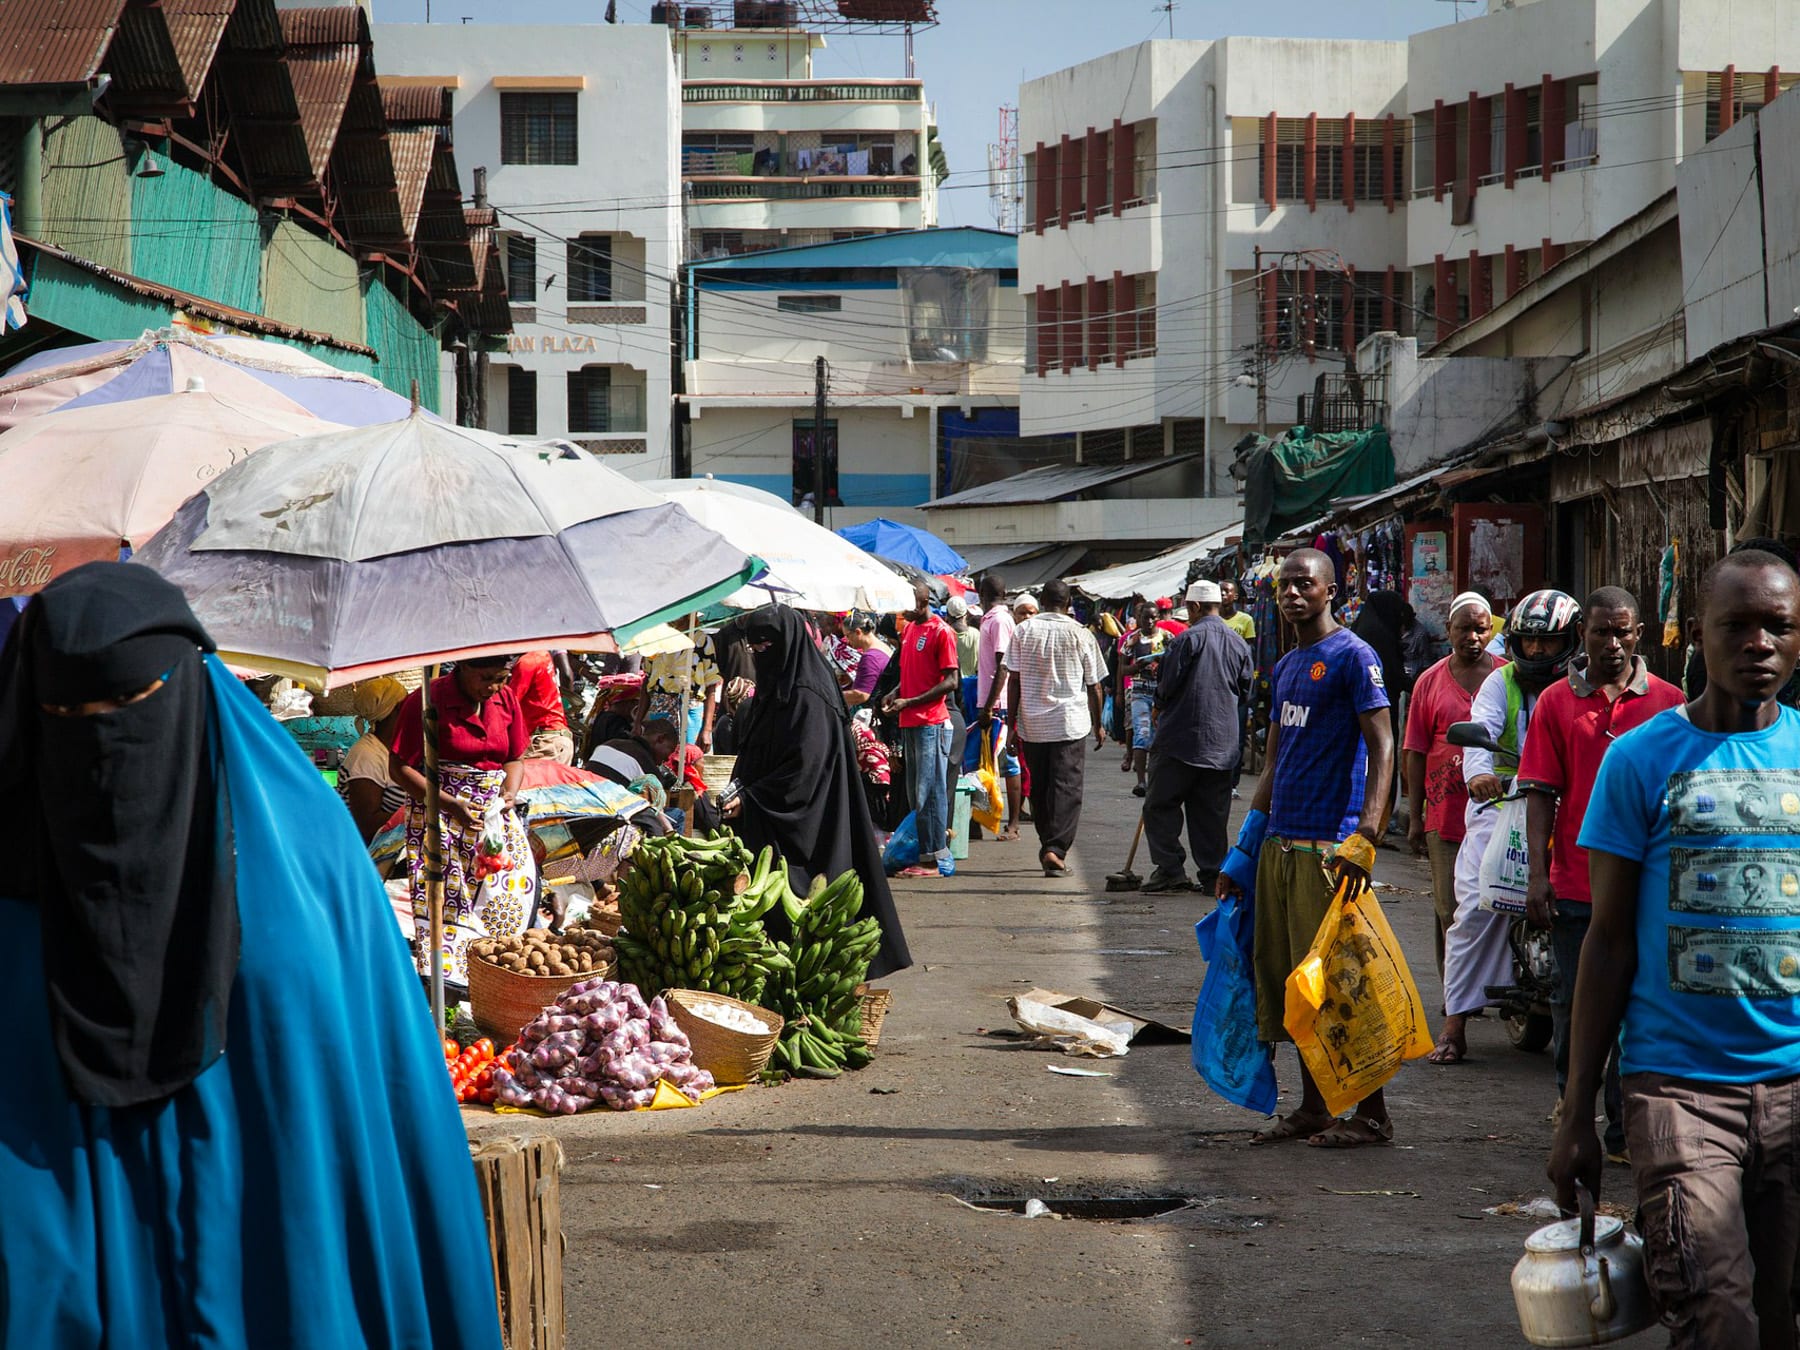 A typical Mombasa local market scene. Image by Rolf Dobberstein, Pixabay.com